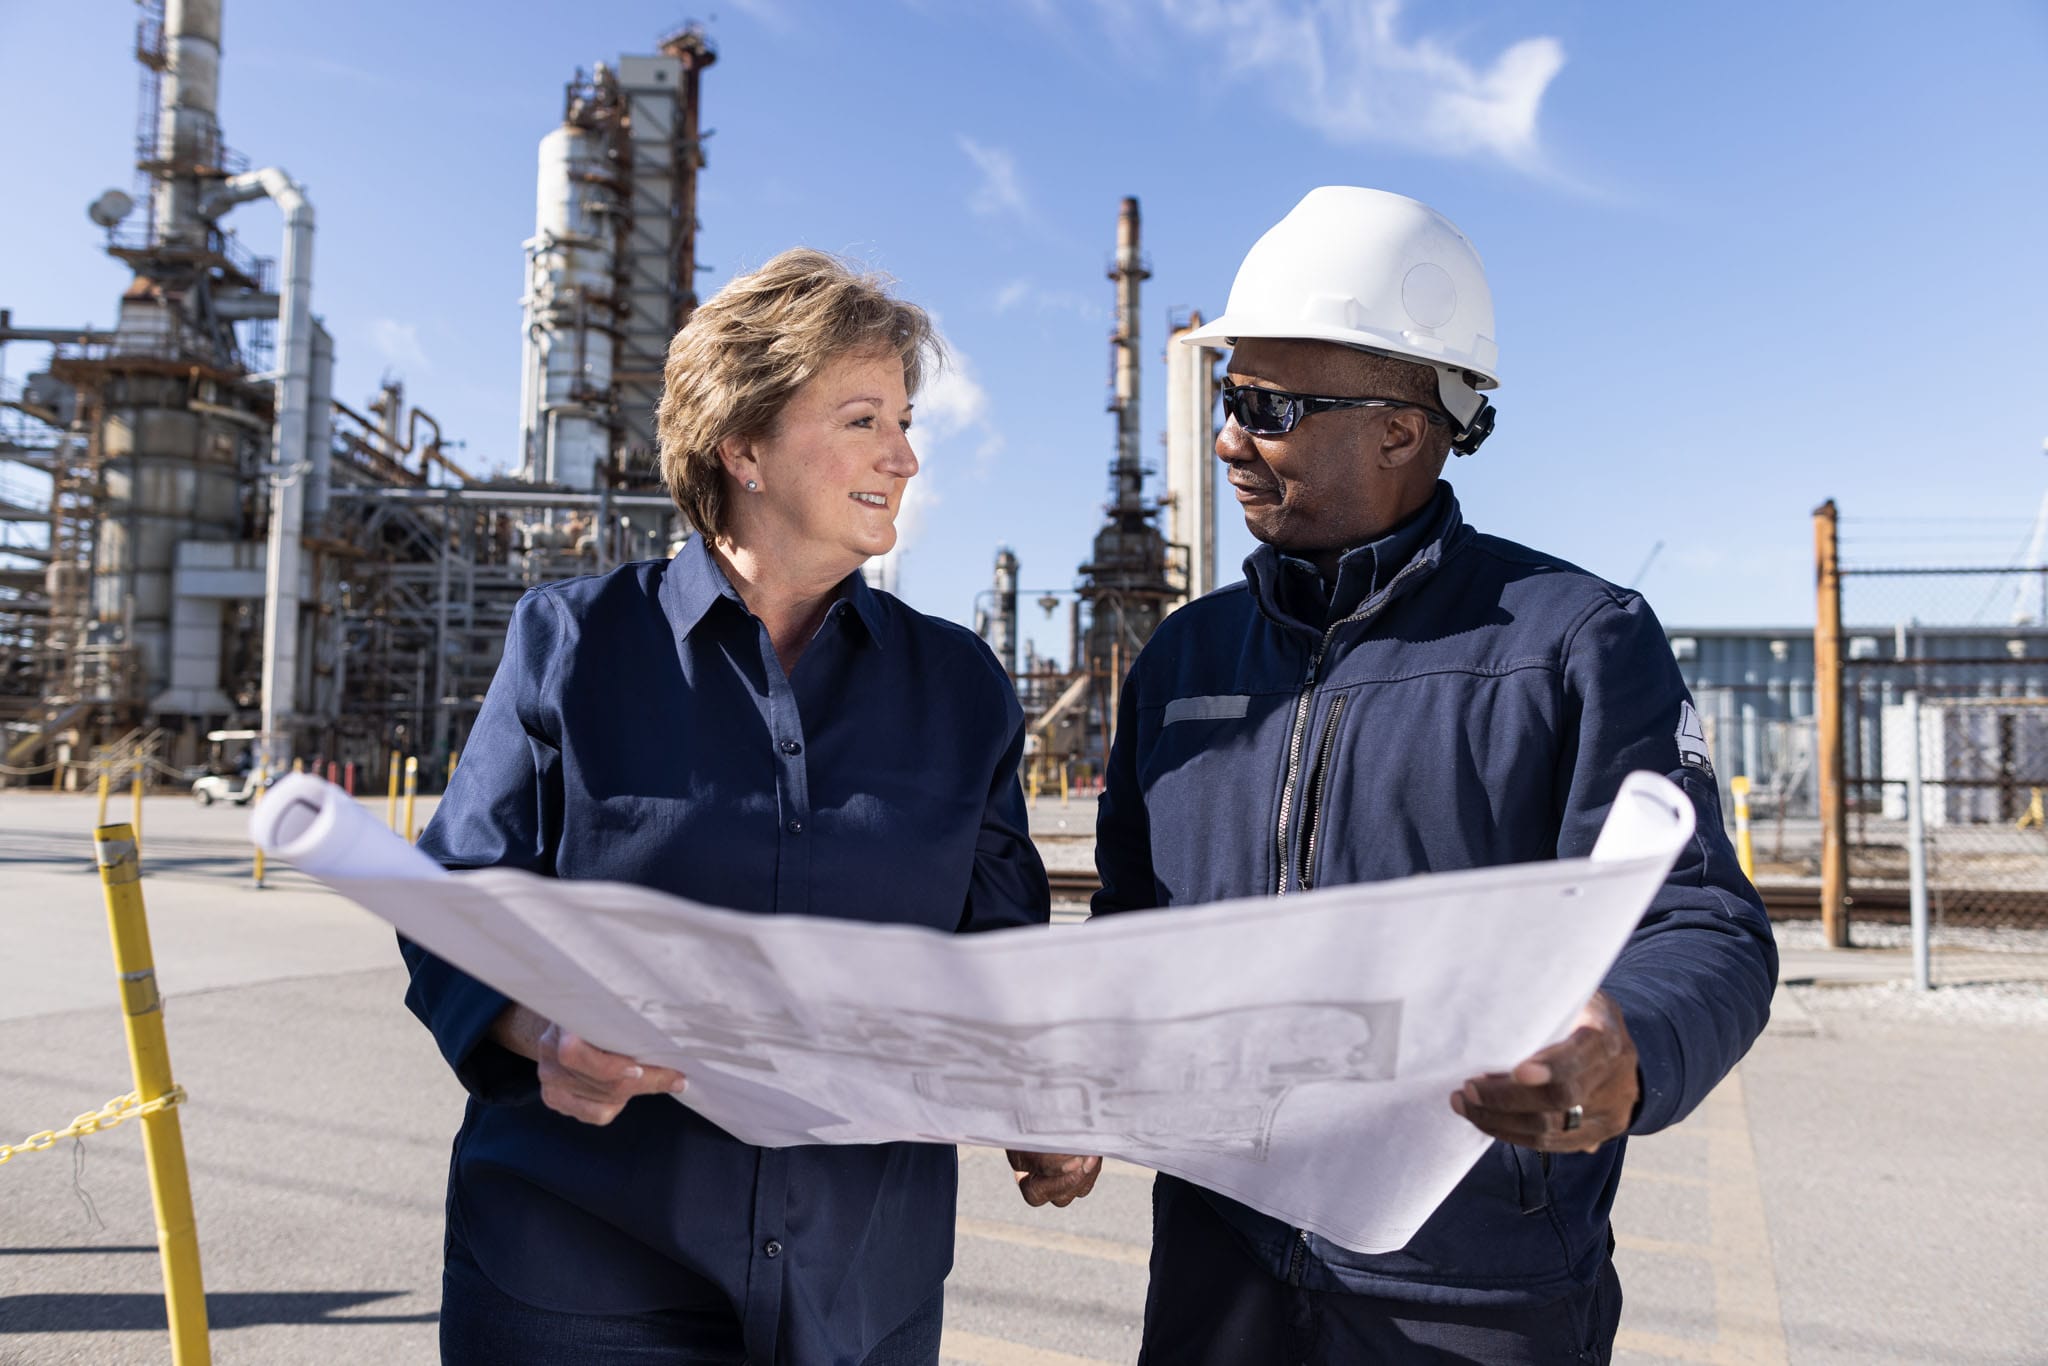 sharon-hewitt-mid-sixties-caucasian-woman-with-african-american-oil-refinery-worker-whilst-holding-map-plan